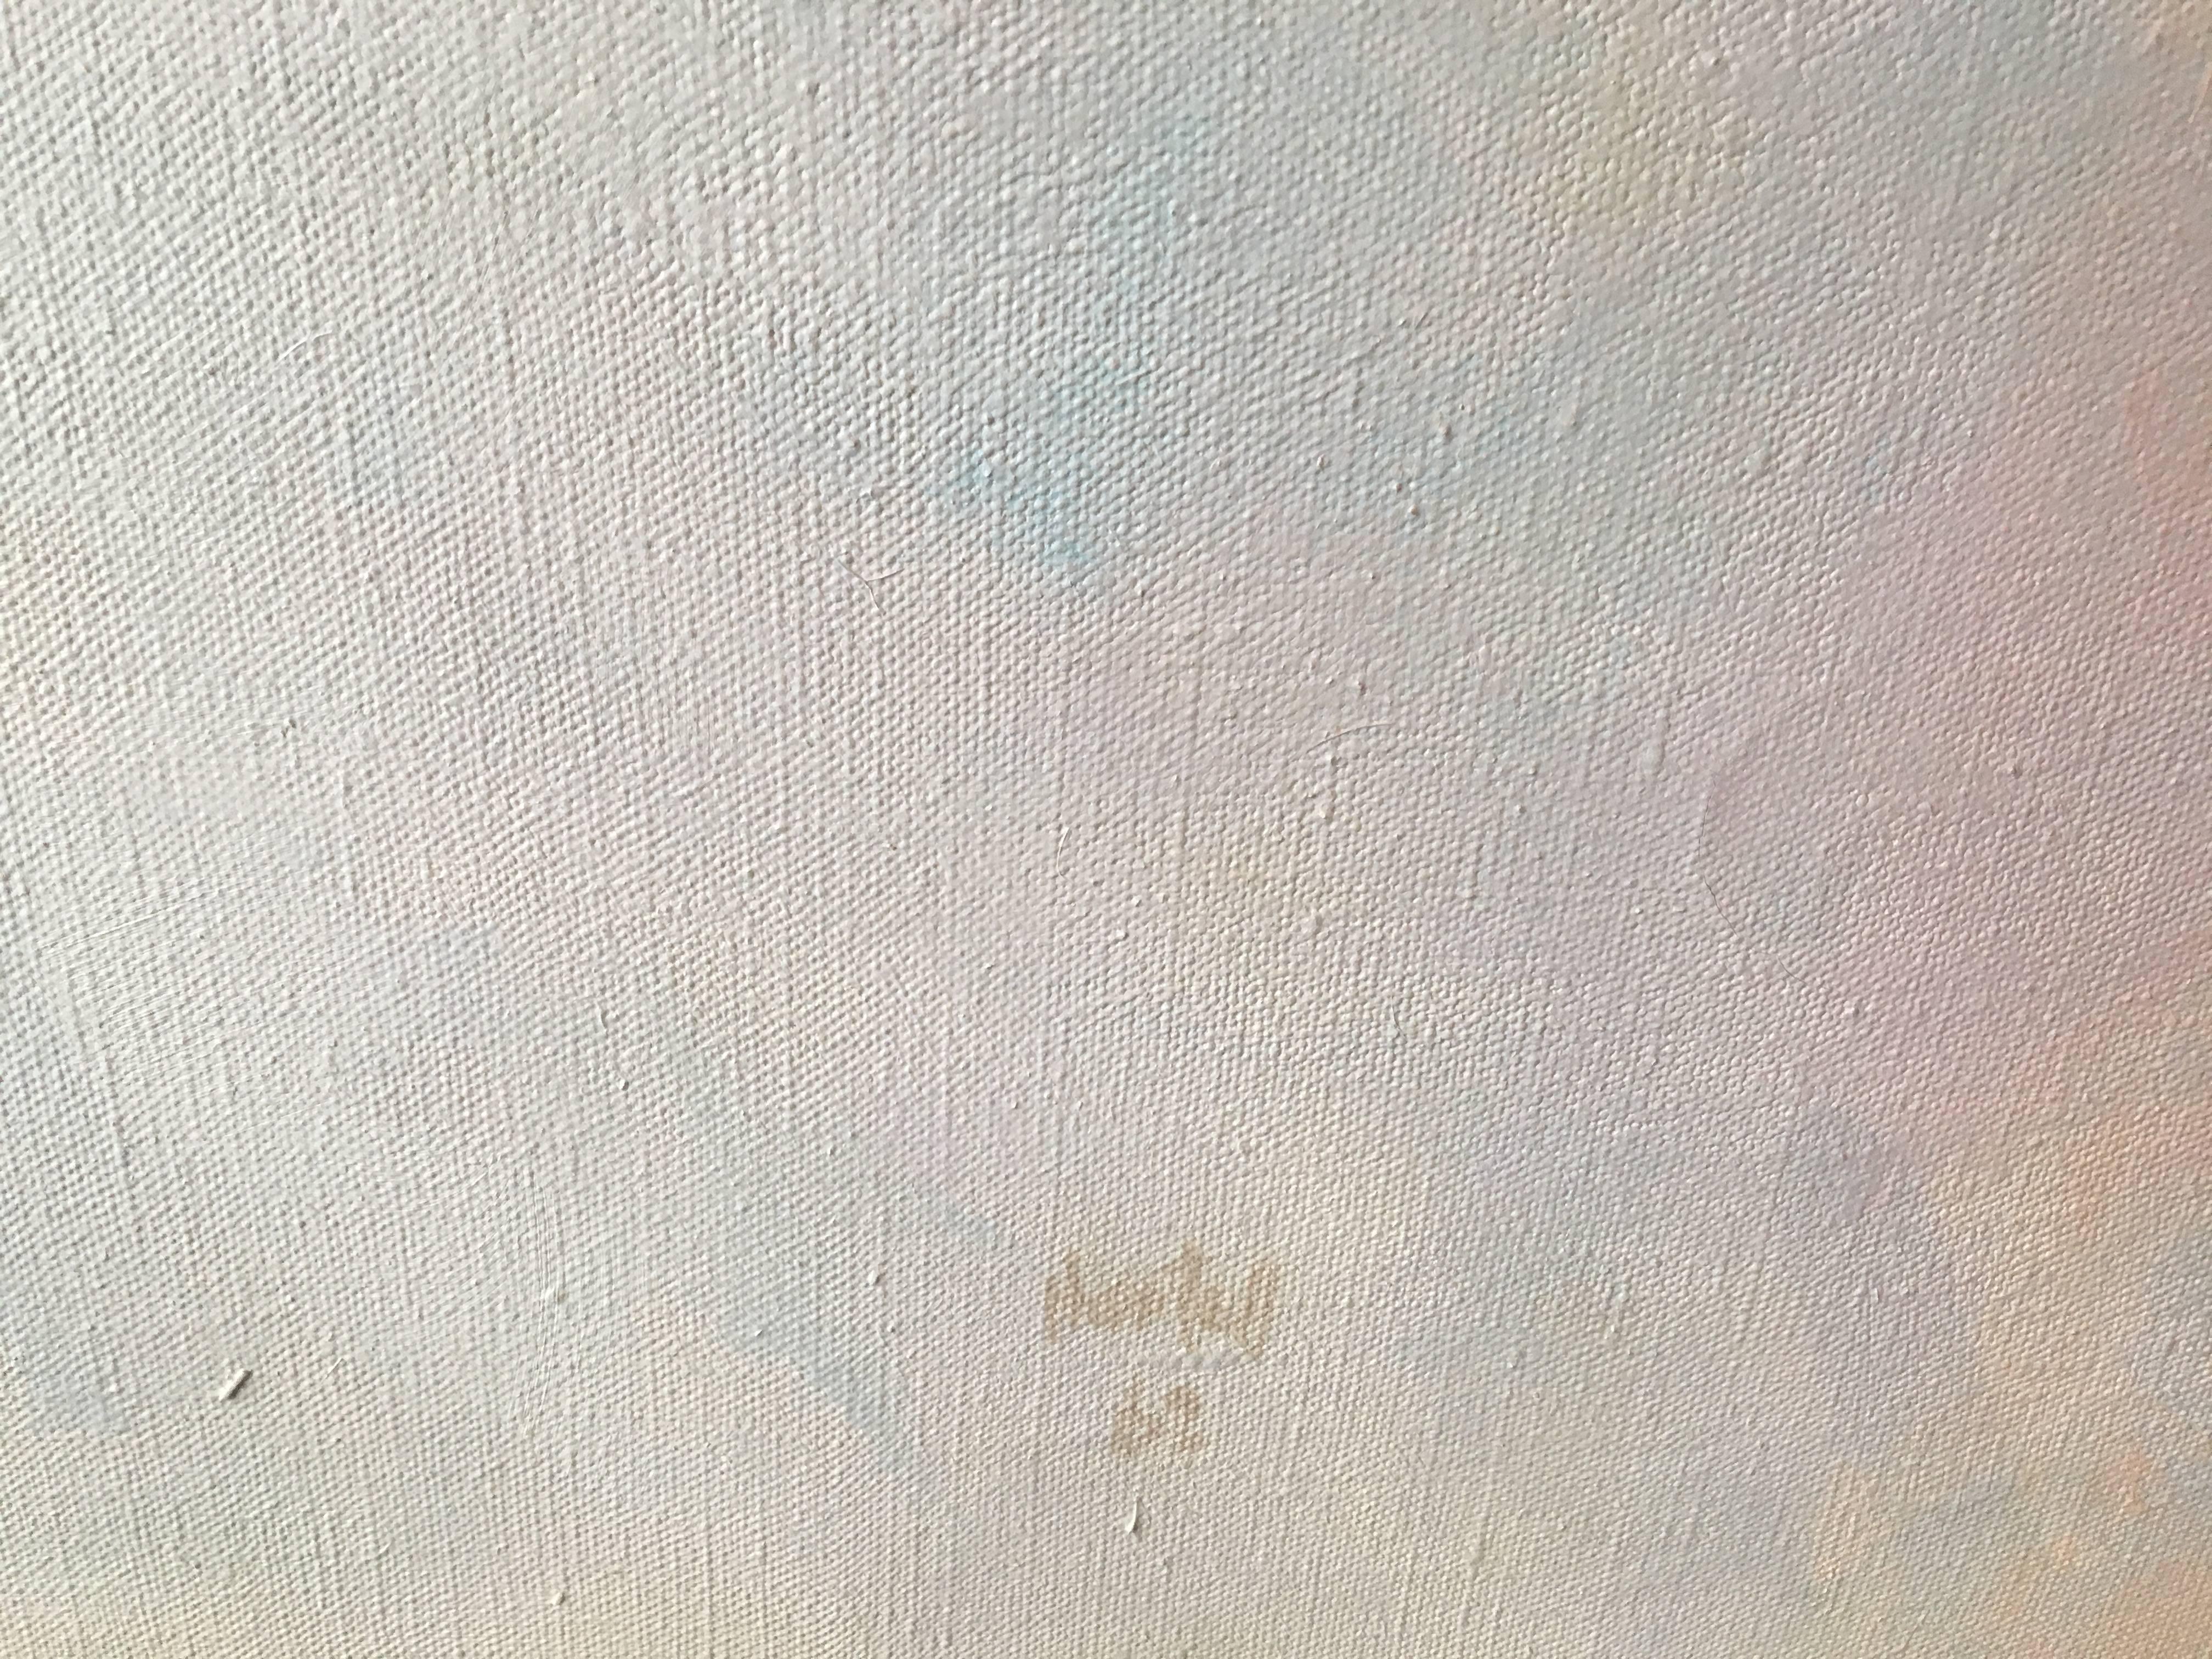 Vigil - Beige Abstract Painting by John Hartell